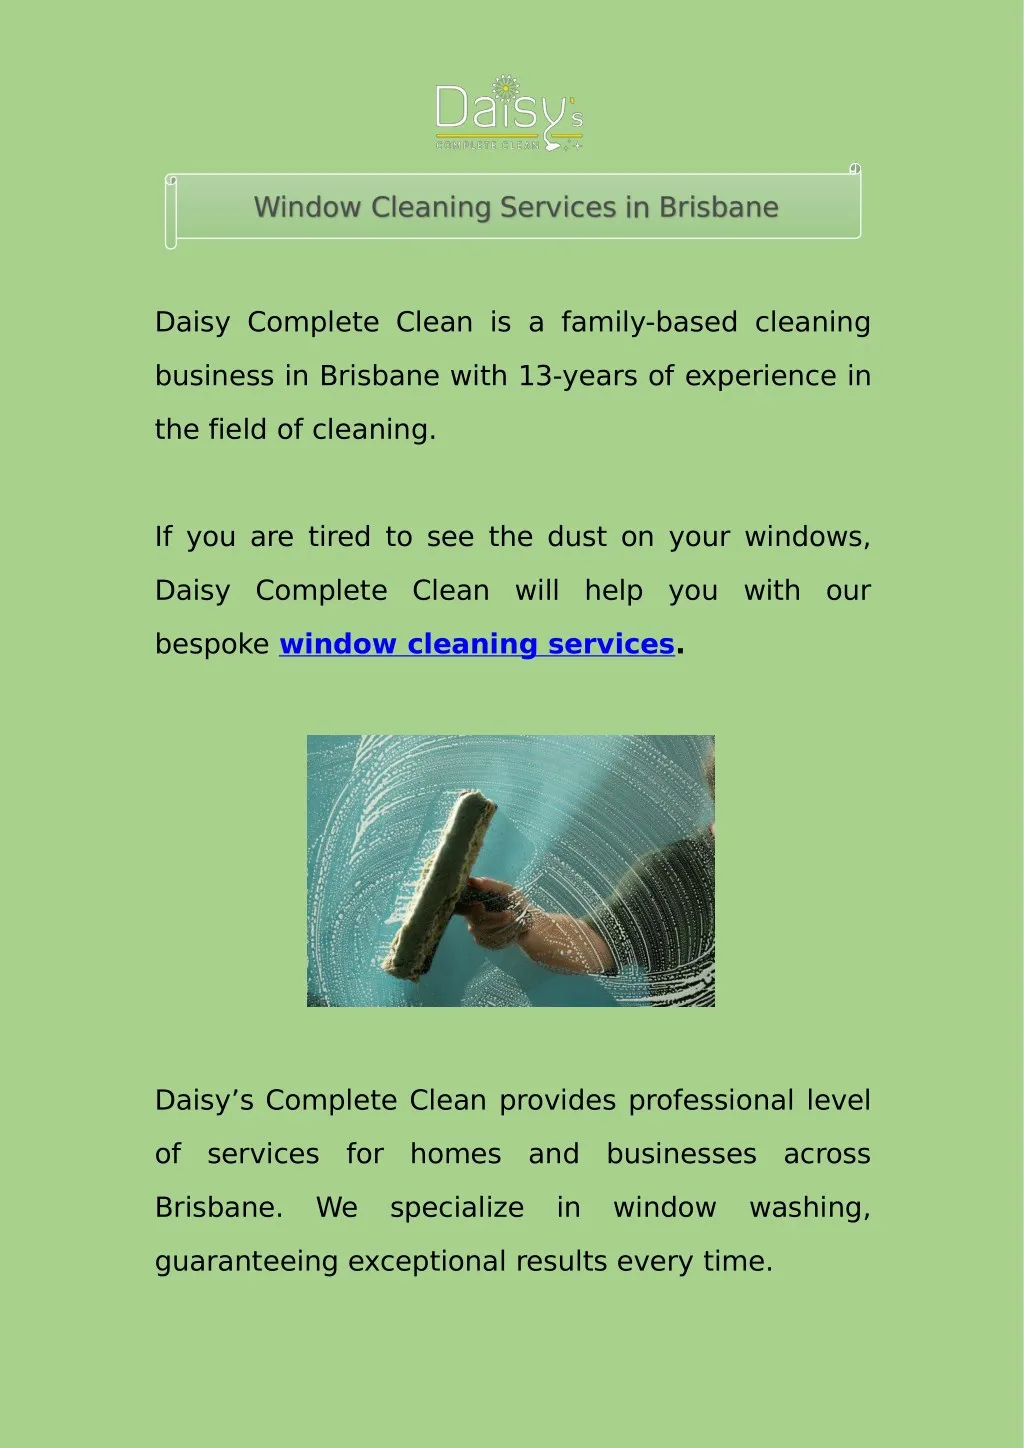 daisy complete clean is a family based cleaning